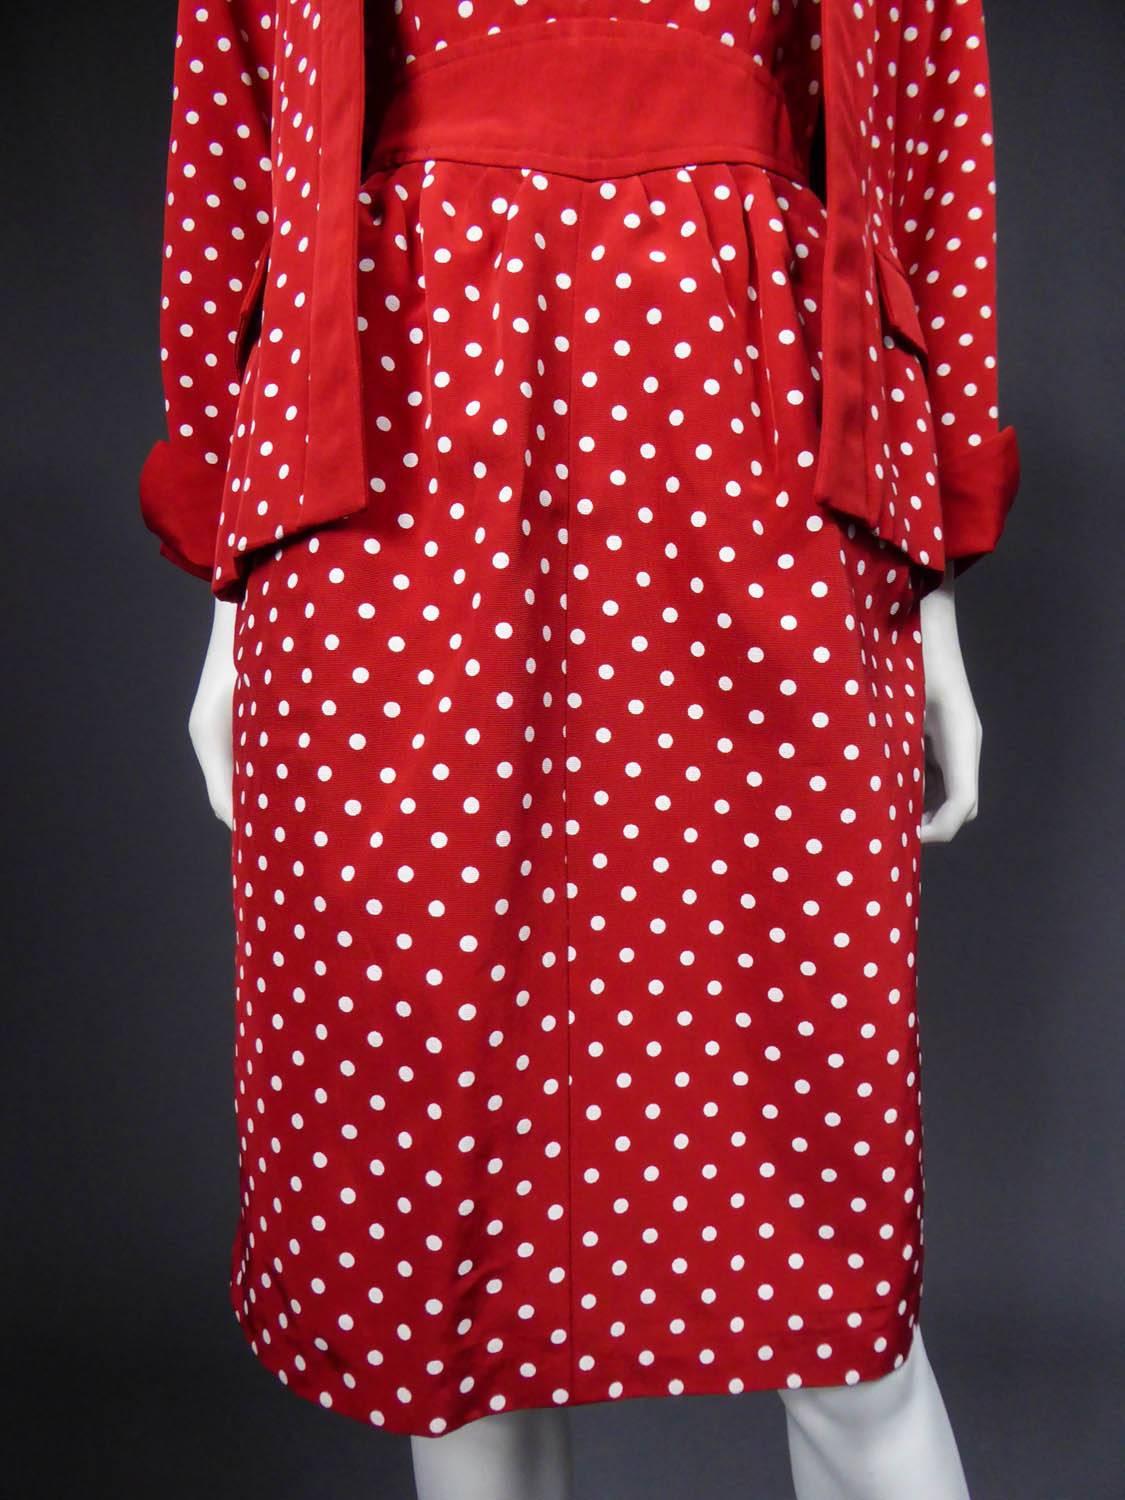 A Nina Ricci Dress and Jacket Silk Polka Dot Set - Circa 1980 In Good Condition For Sale In Toulon, FR